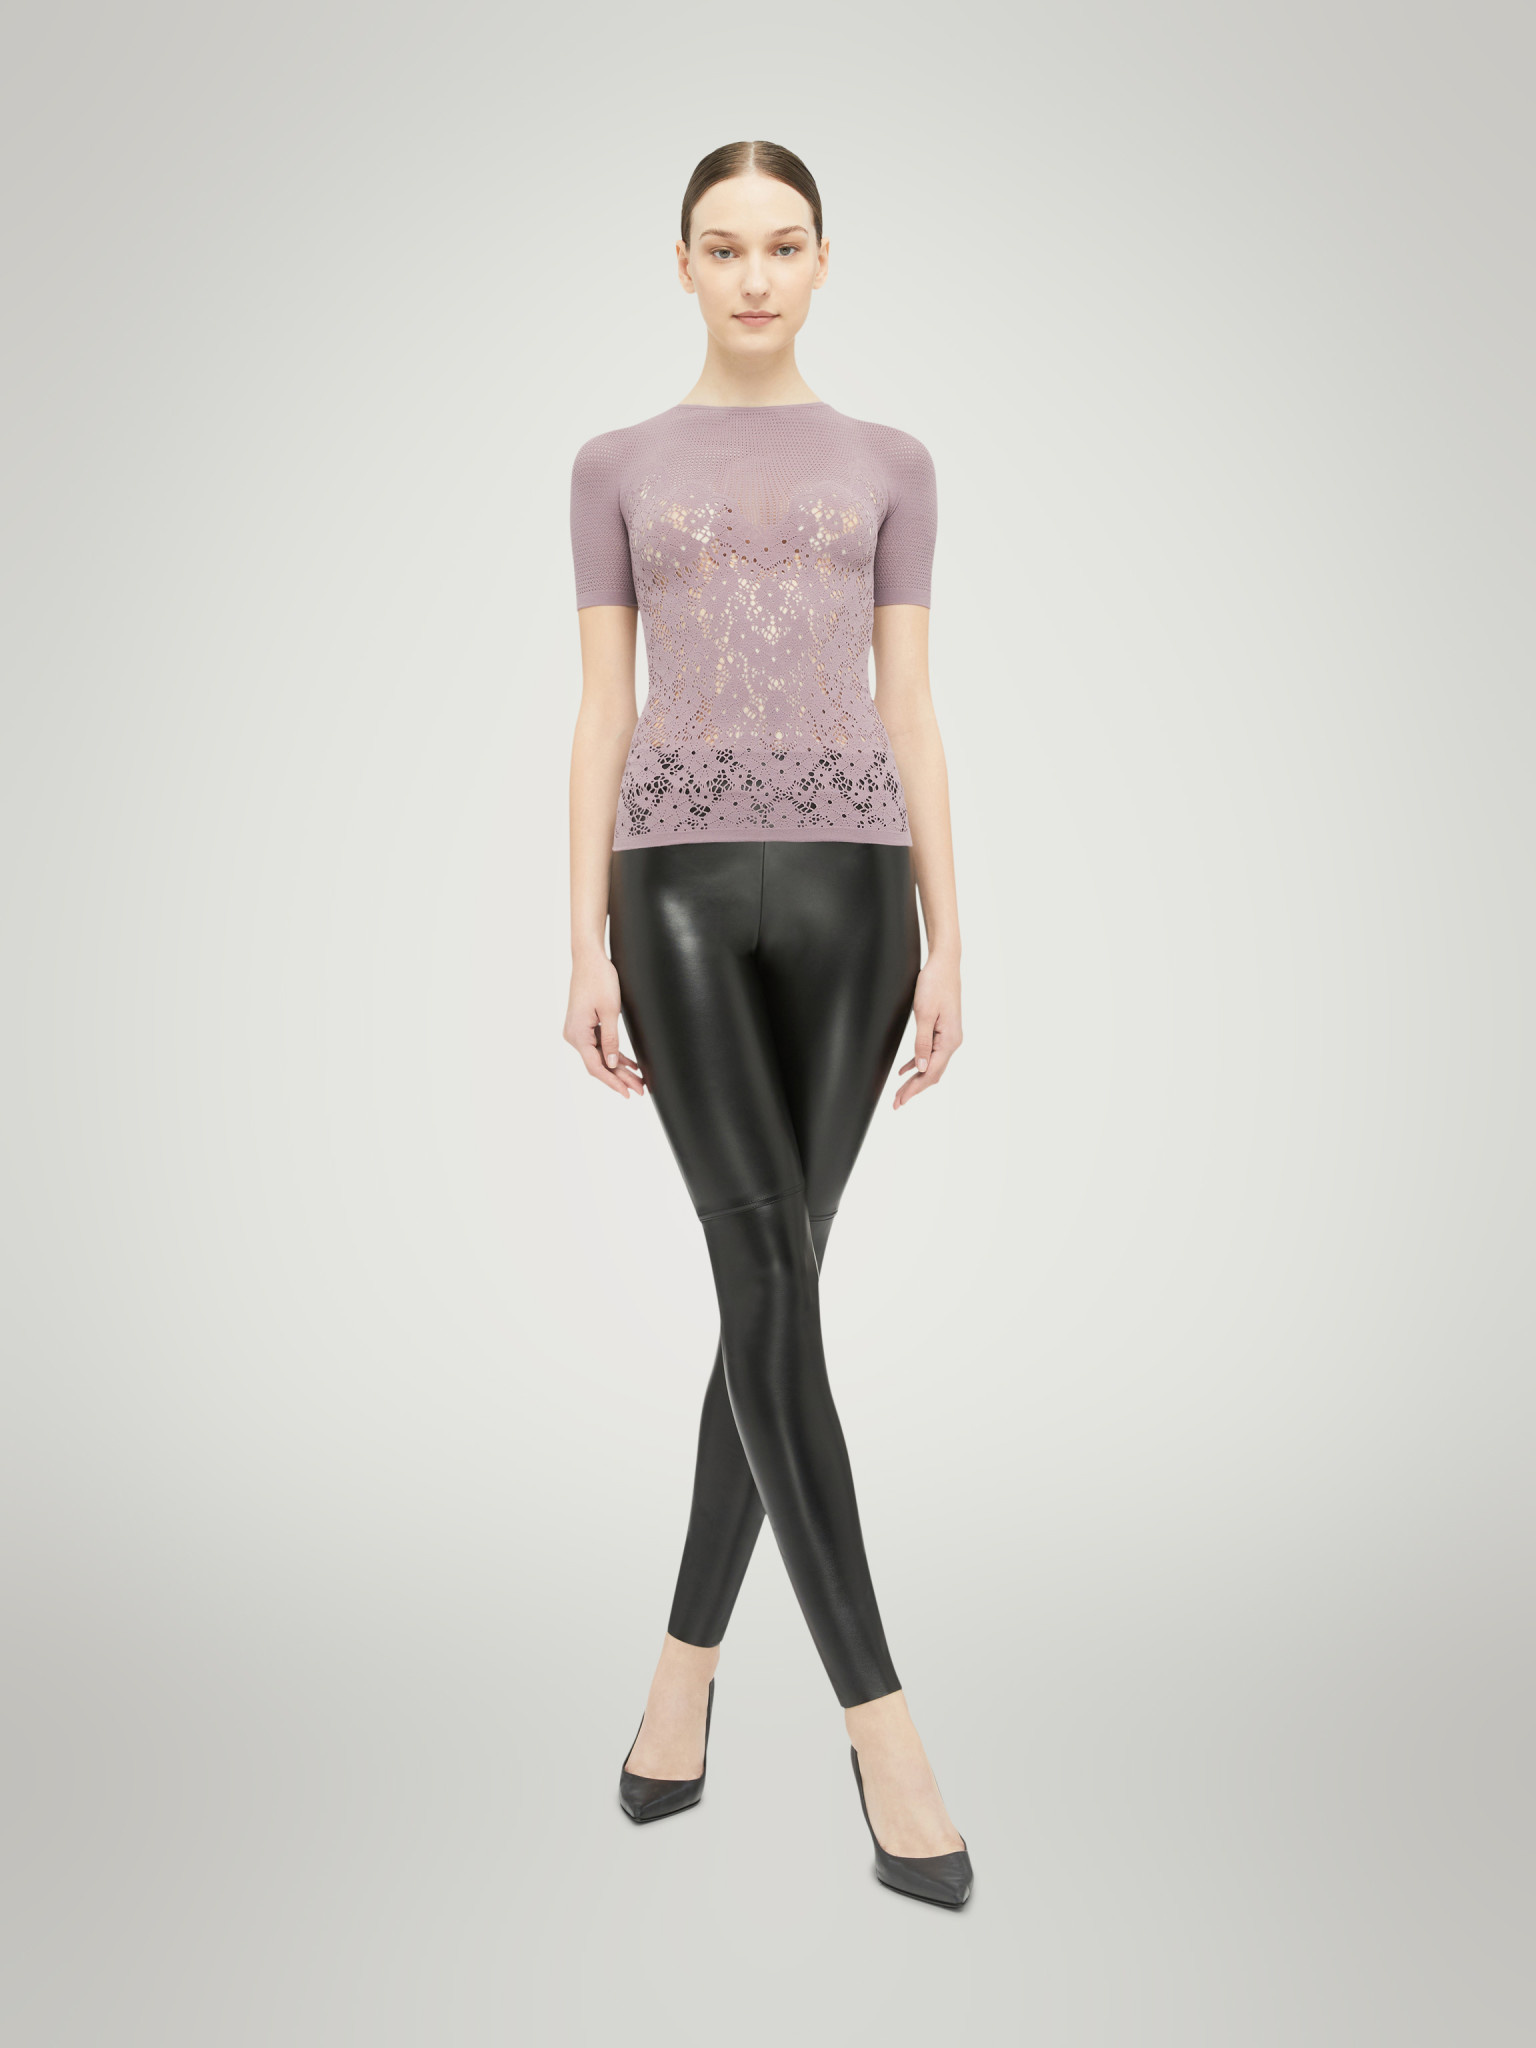 Shop Wolford Women's Lace Tops up to 60% Off